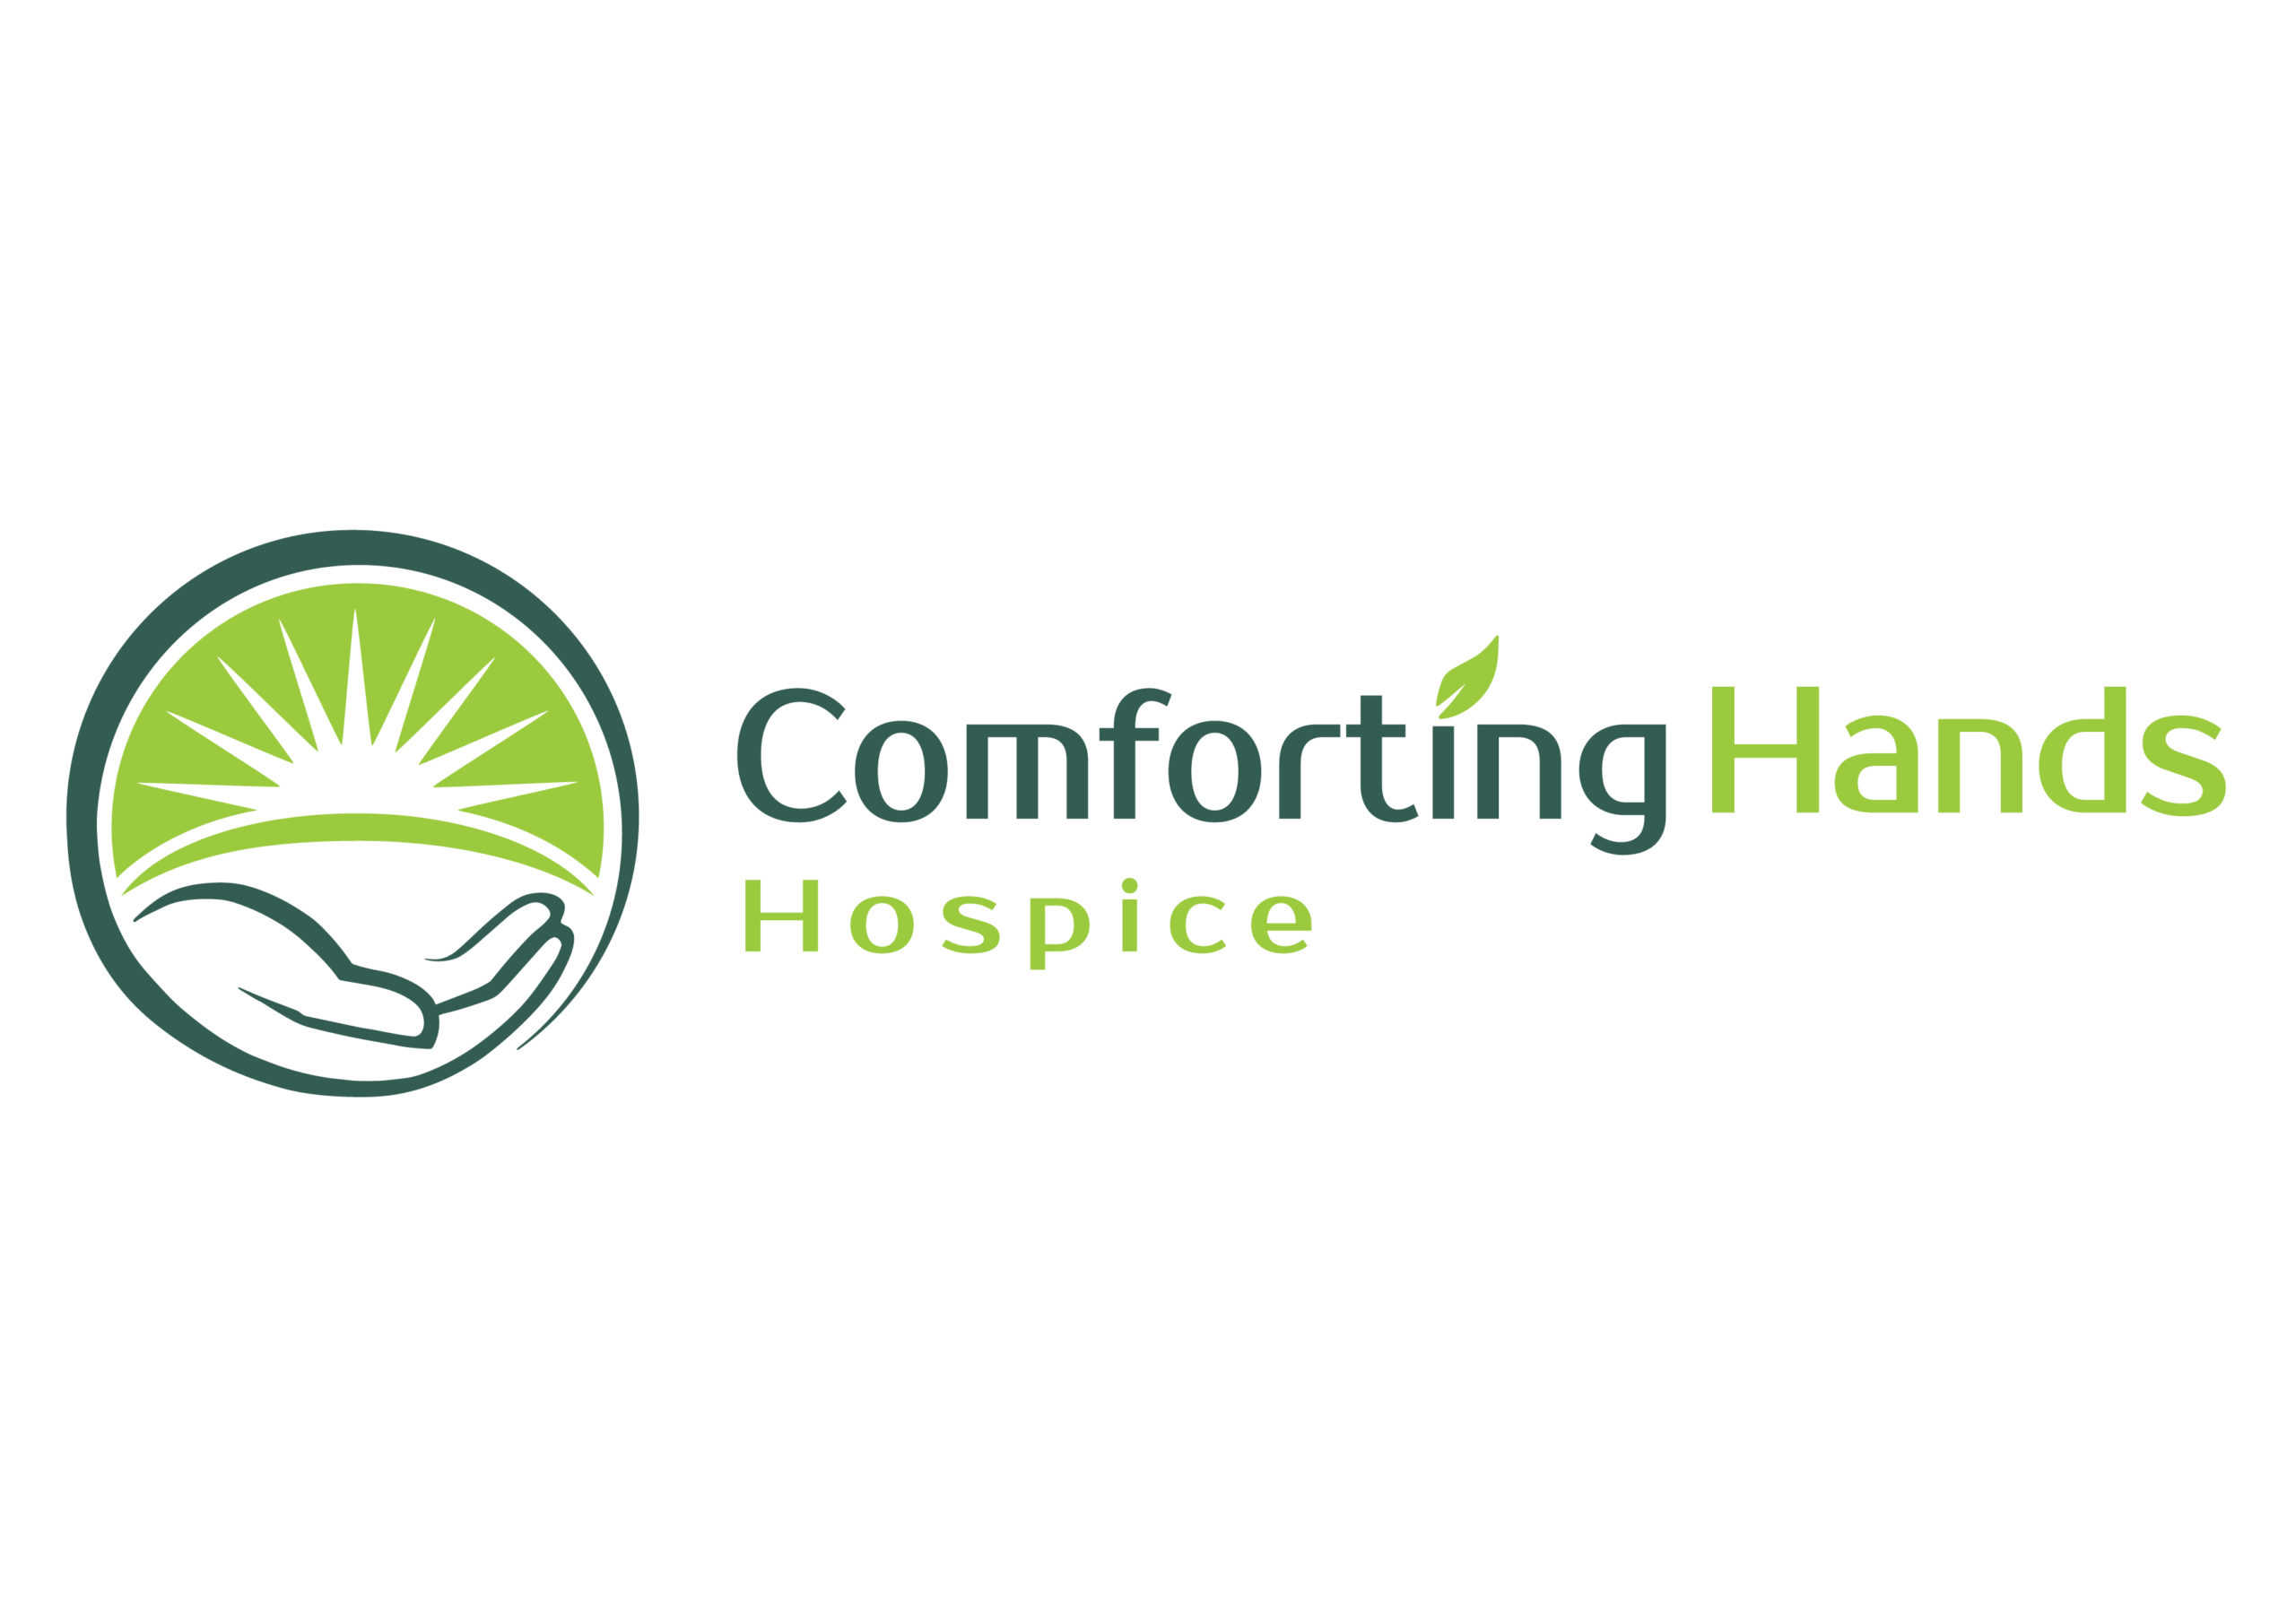 A logo of the business "Comforting Hands Hospice".